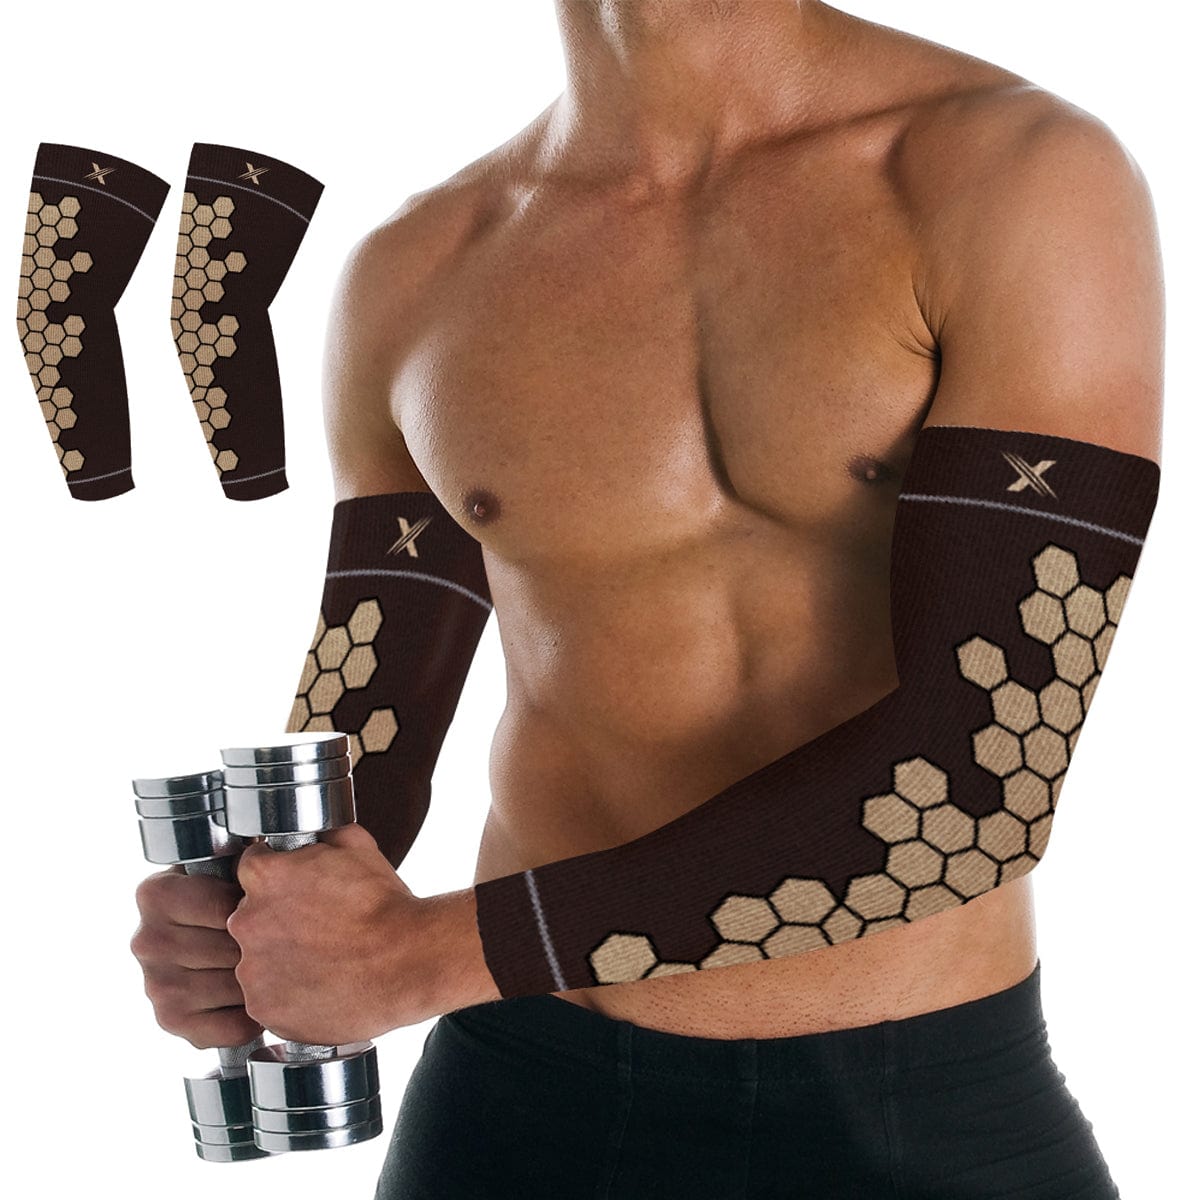 Copper Joe Elbow Compression Sleeve- 1 Pair, X-Large - Fred Meyer